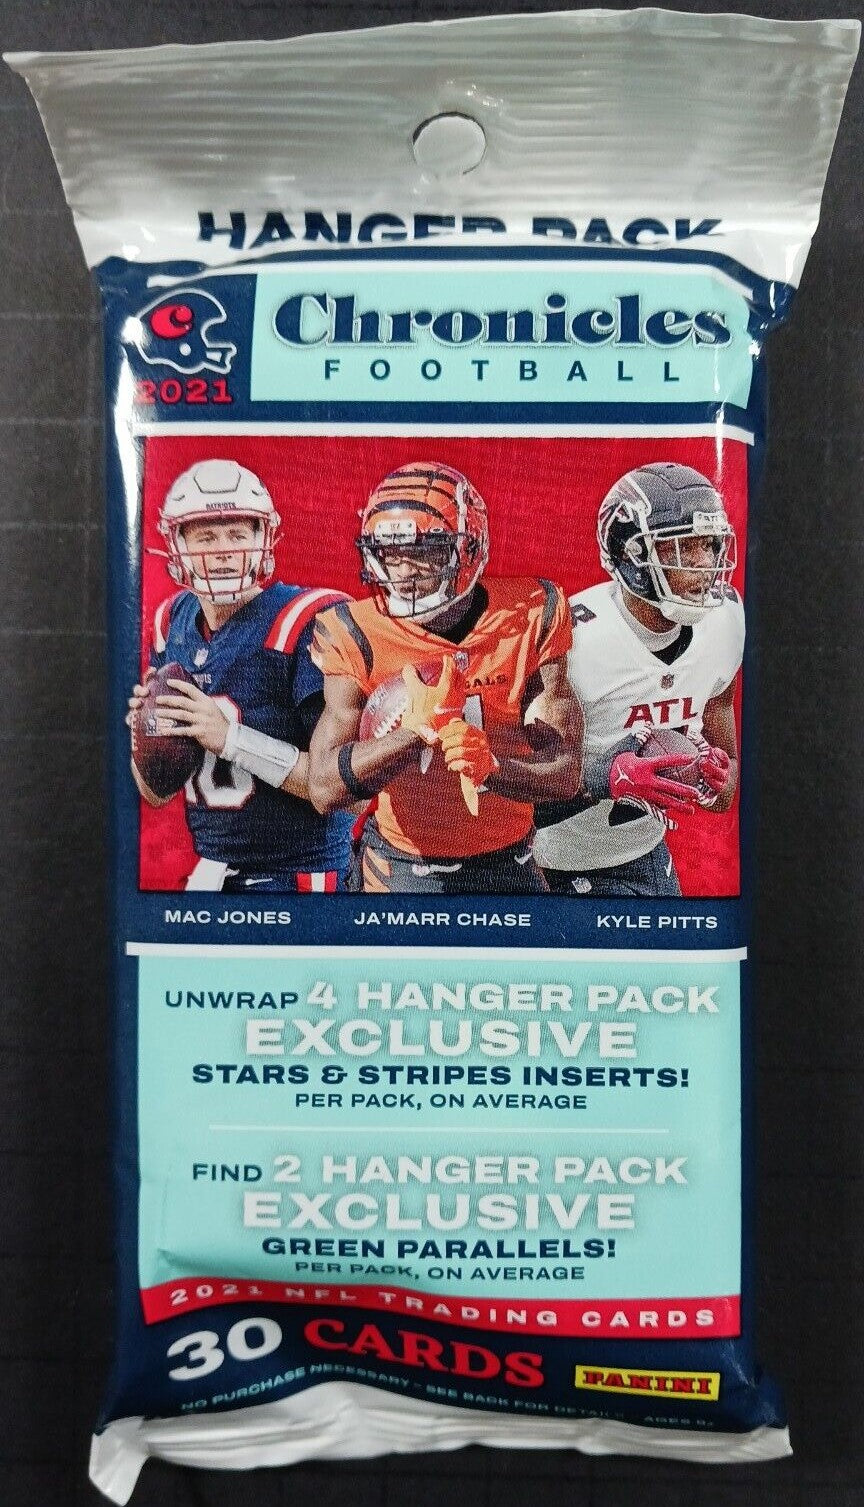 2021 Panini Chronicles NFL Football 30 Card HANGER Pack with EXCLUSIVE GREEN Parallels and Stars Stripes Inserts